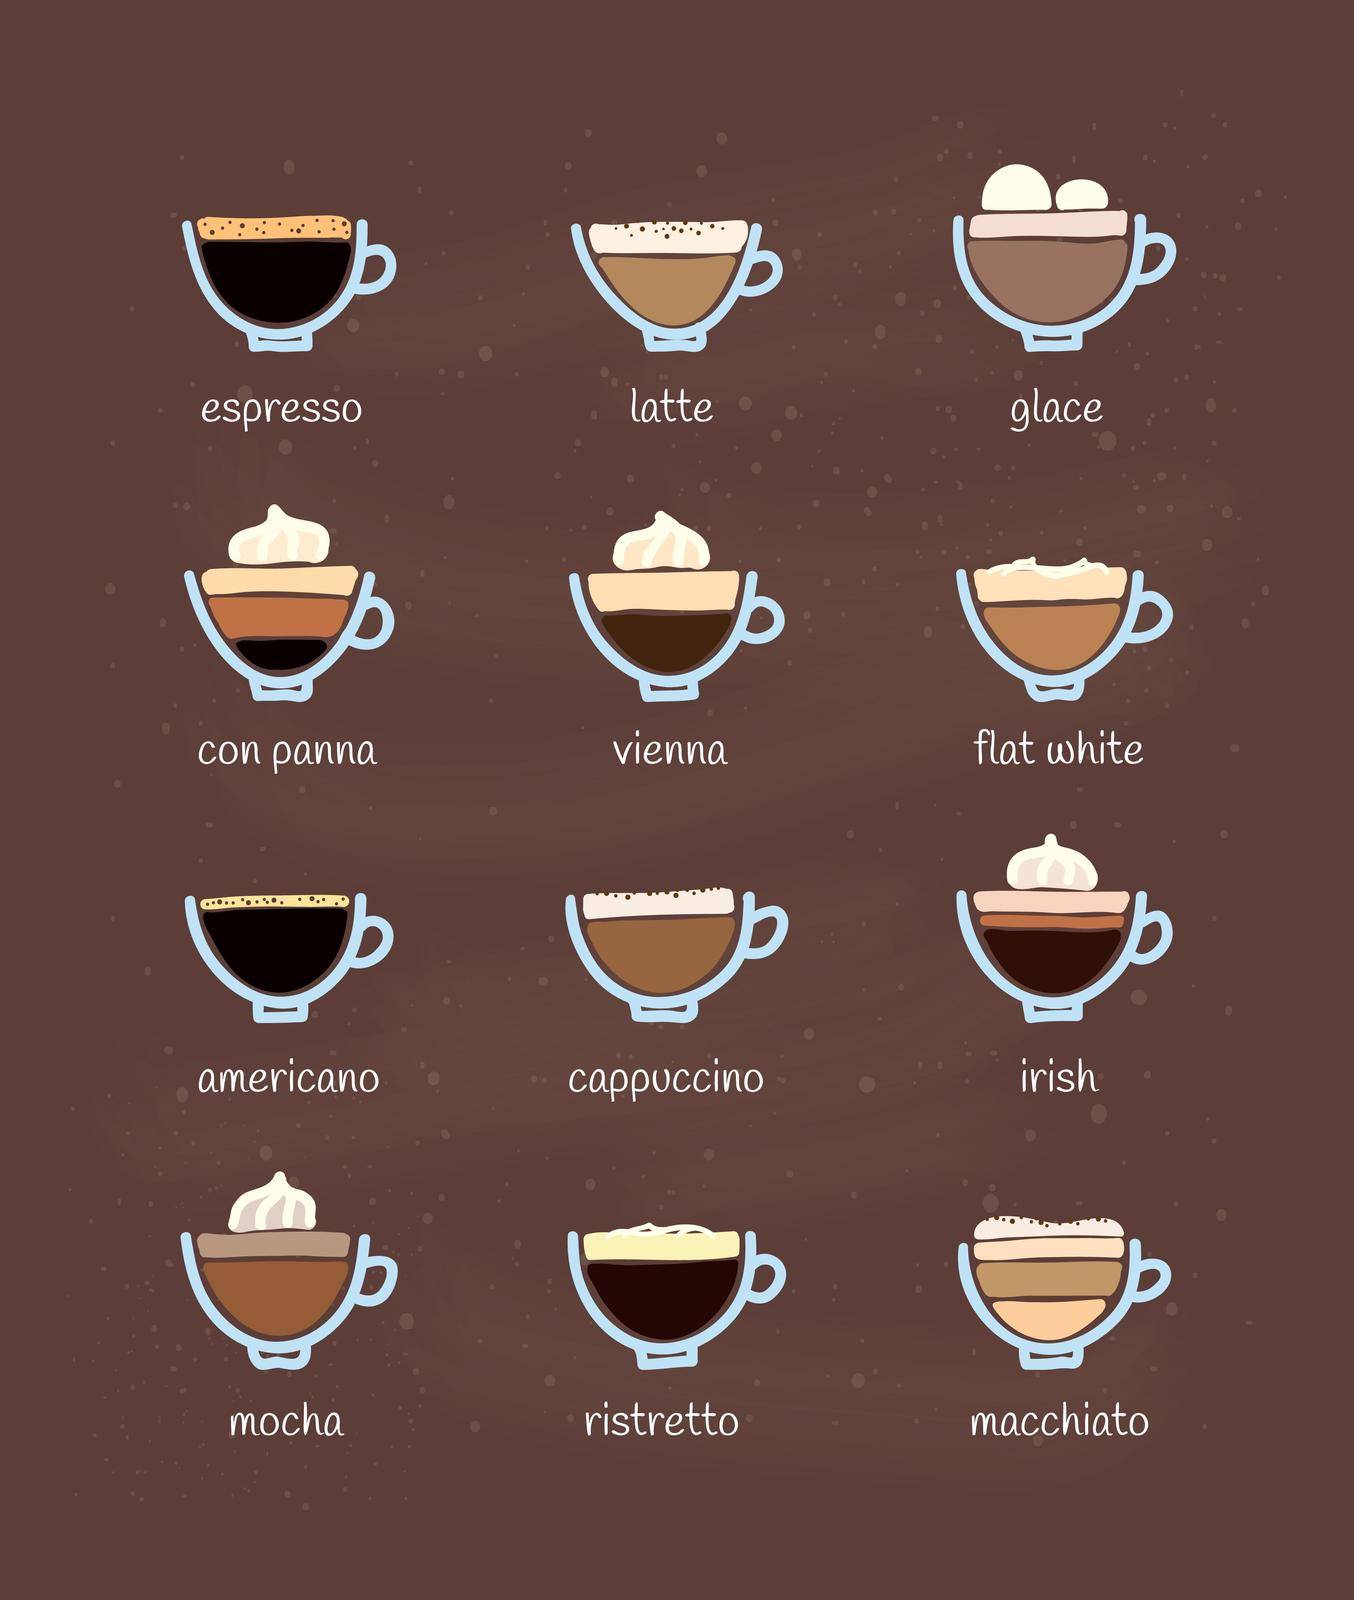 Different doodle coffee drinks with names isolated on brown background.